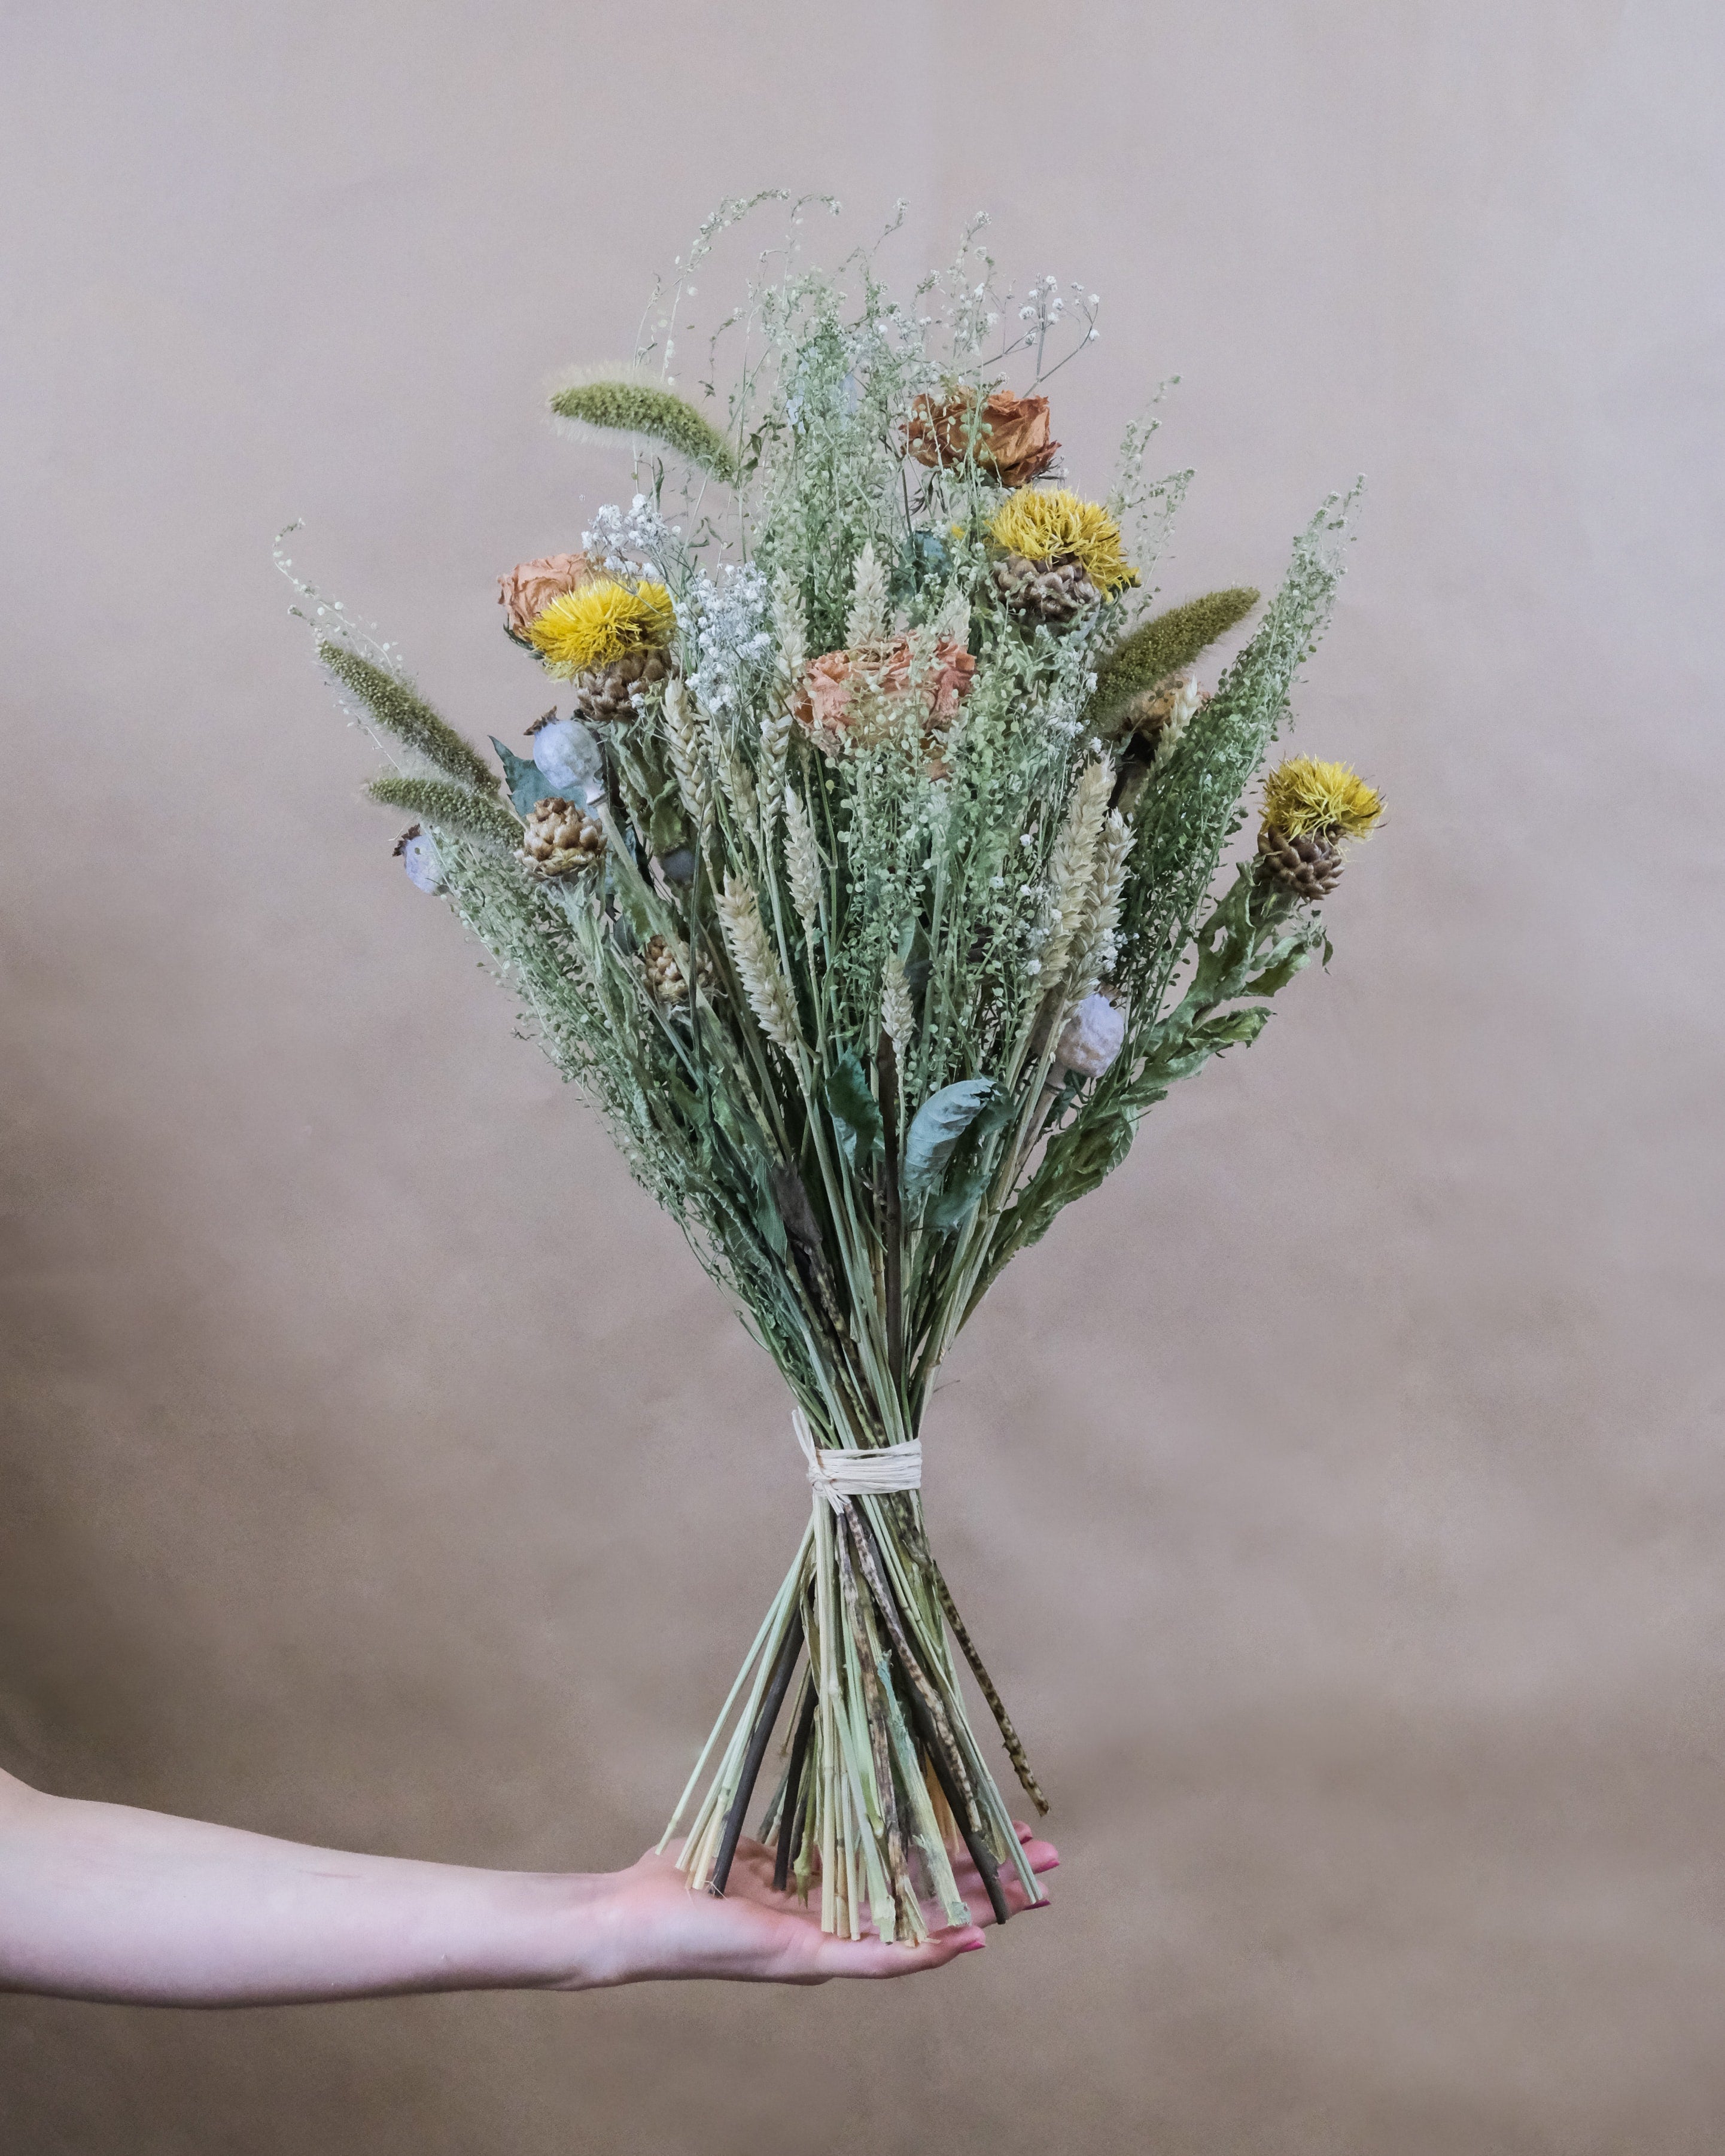 Make your own dried bouquet